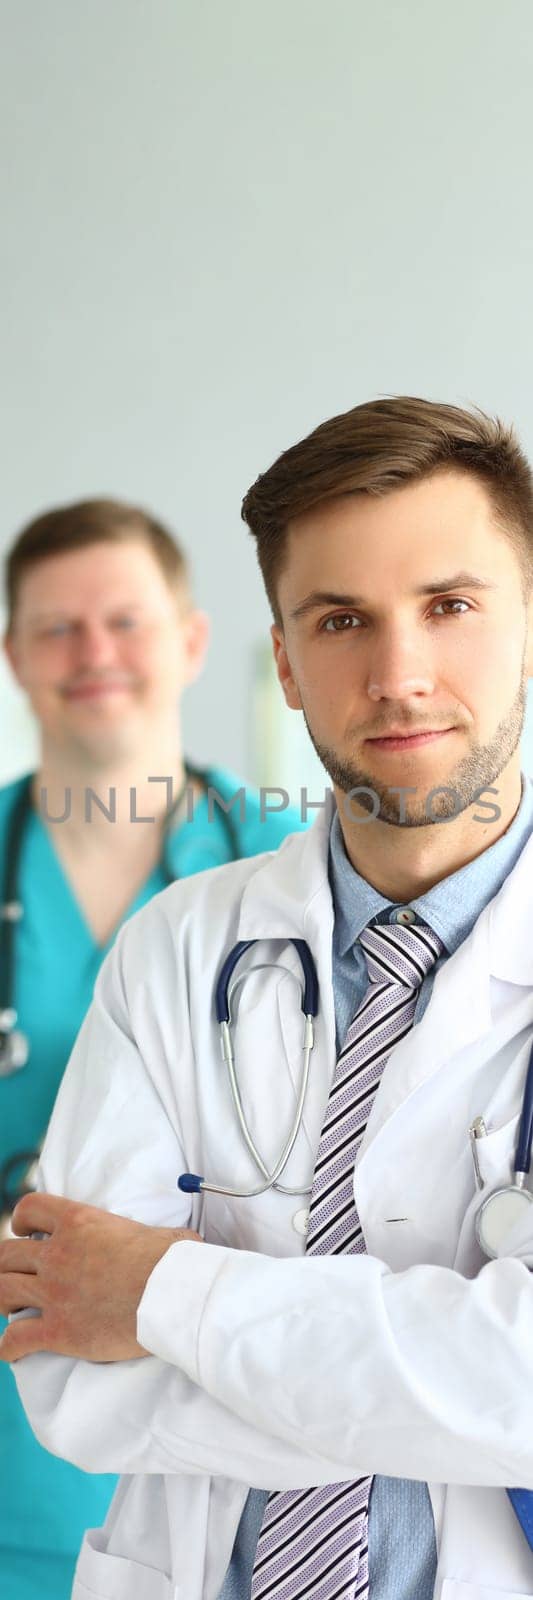 Portrait of two men in healthcare profession by kuprevich